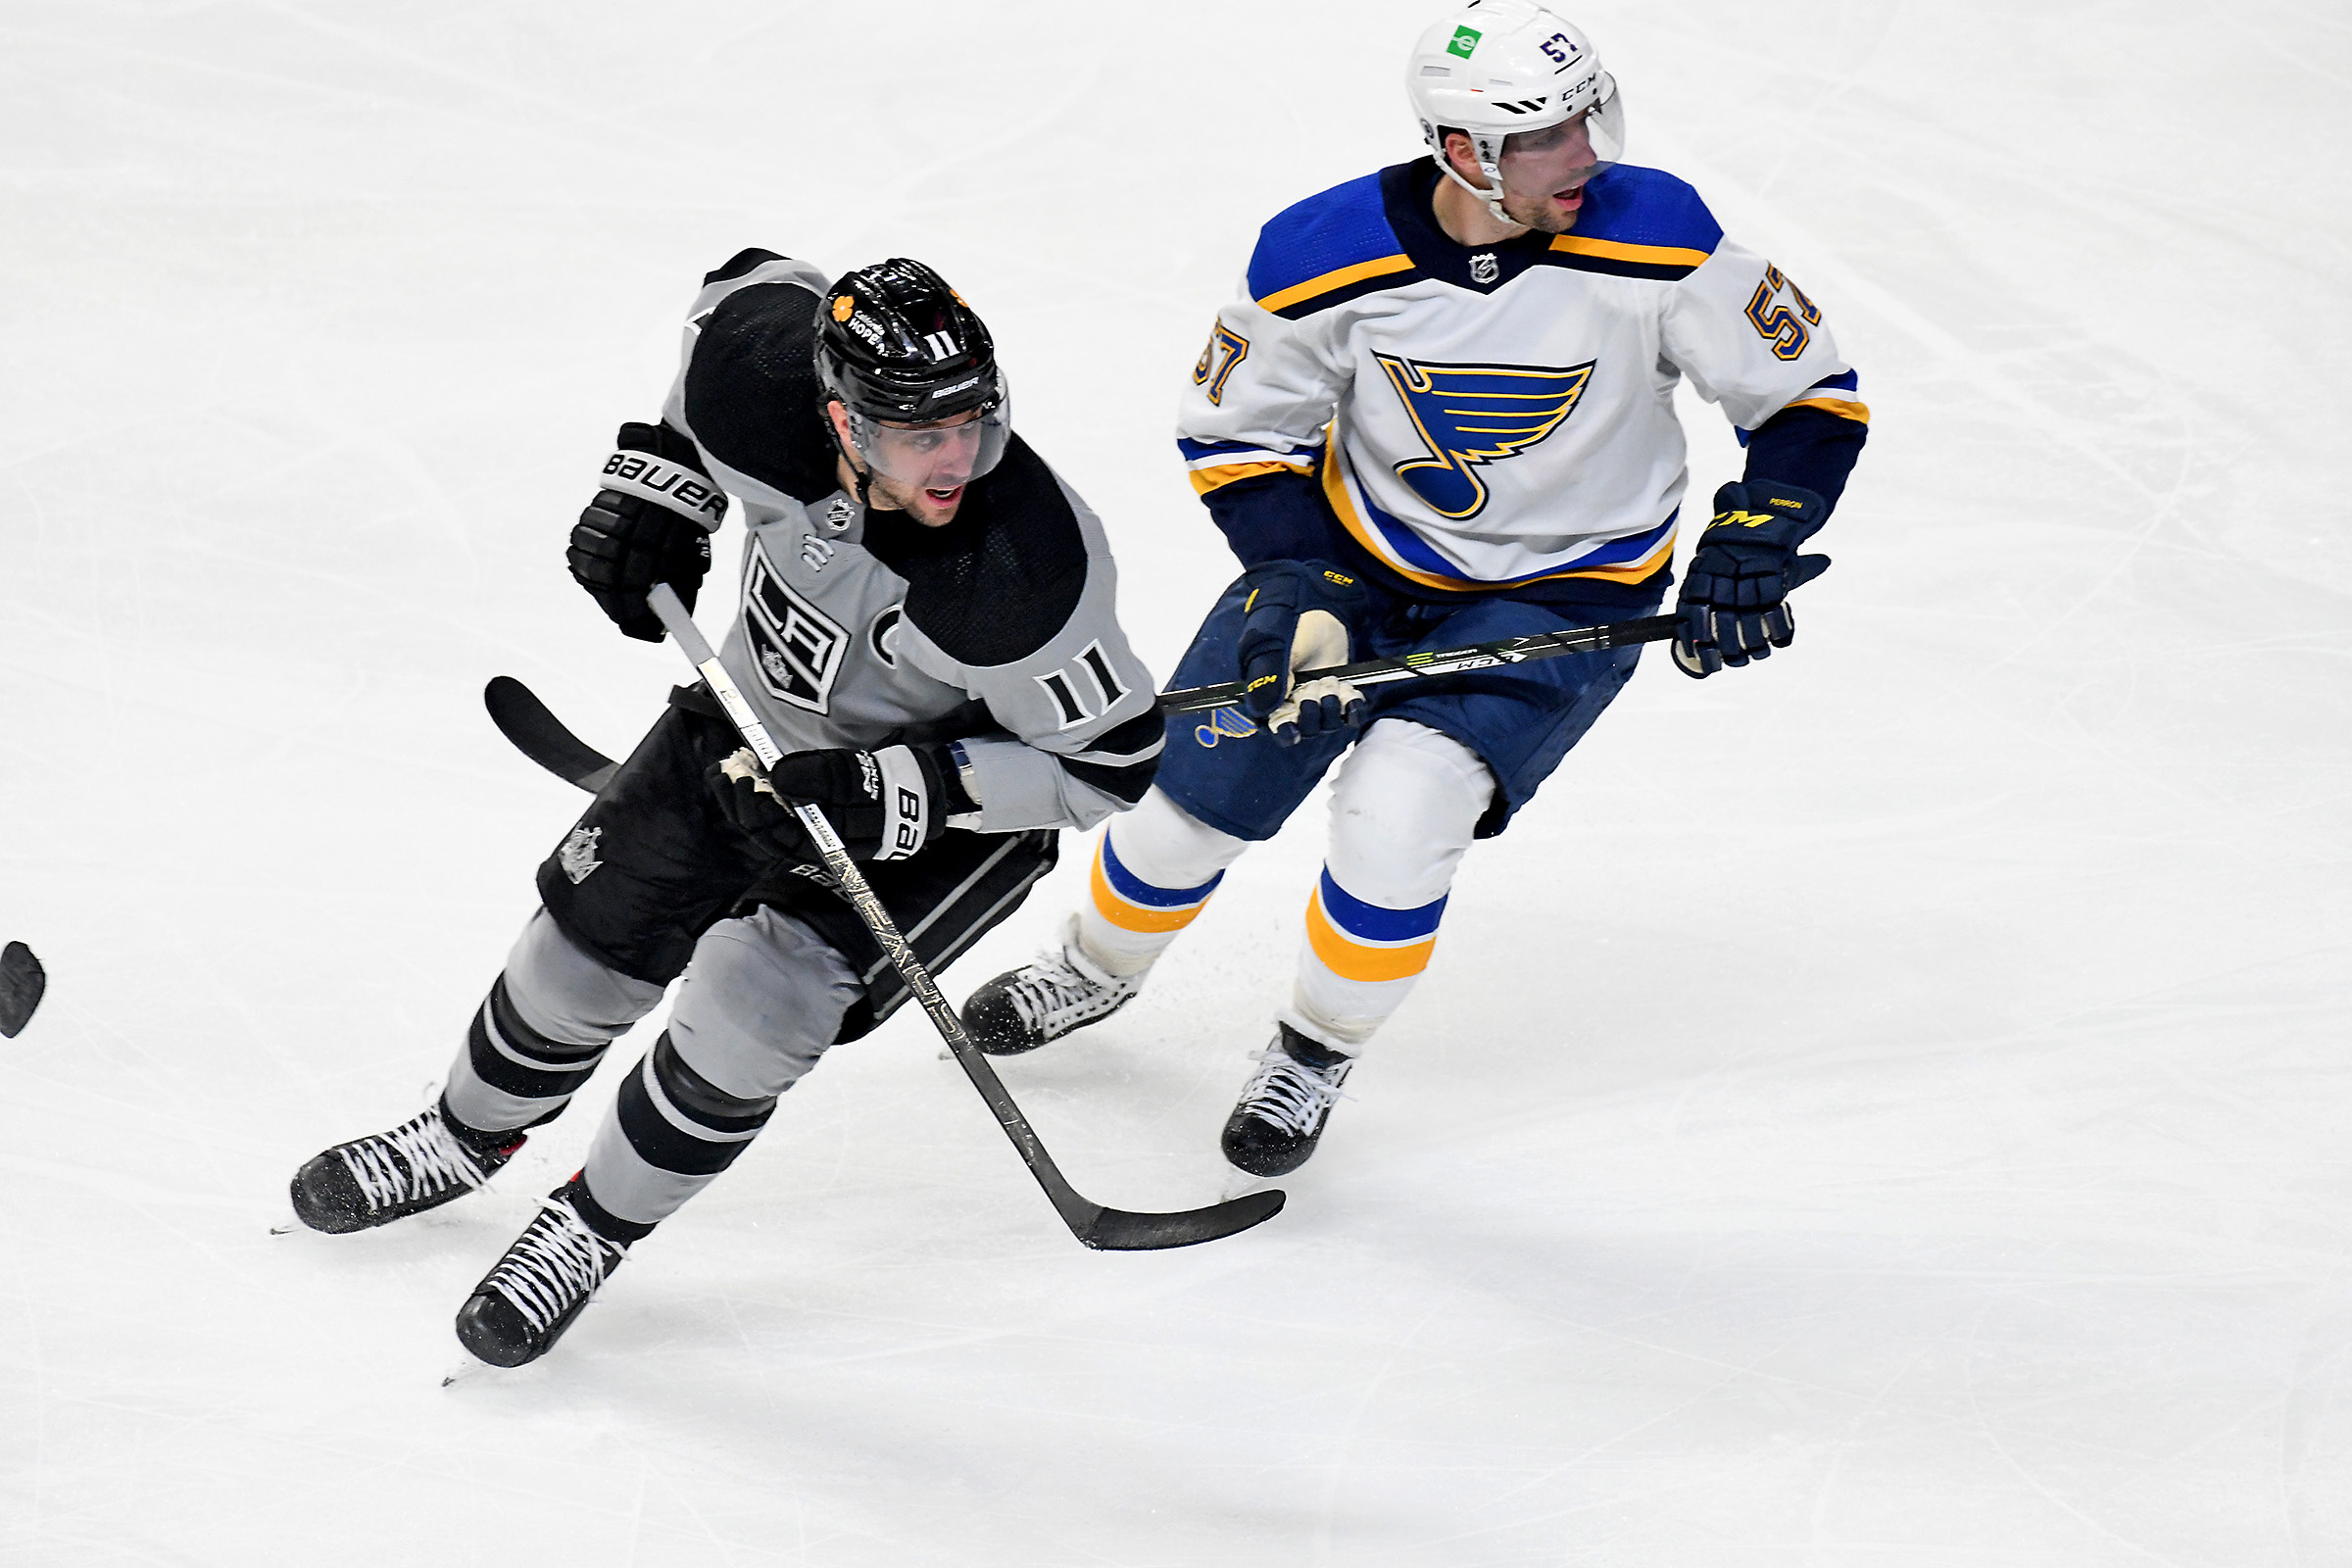 Los Angeles Kings Center Anze Kopitar (11) and St. Louis Blues Right Wing David Perron (57) watch play during a National Hockey League game at the Staples Center in Los Angeles, CA.